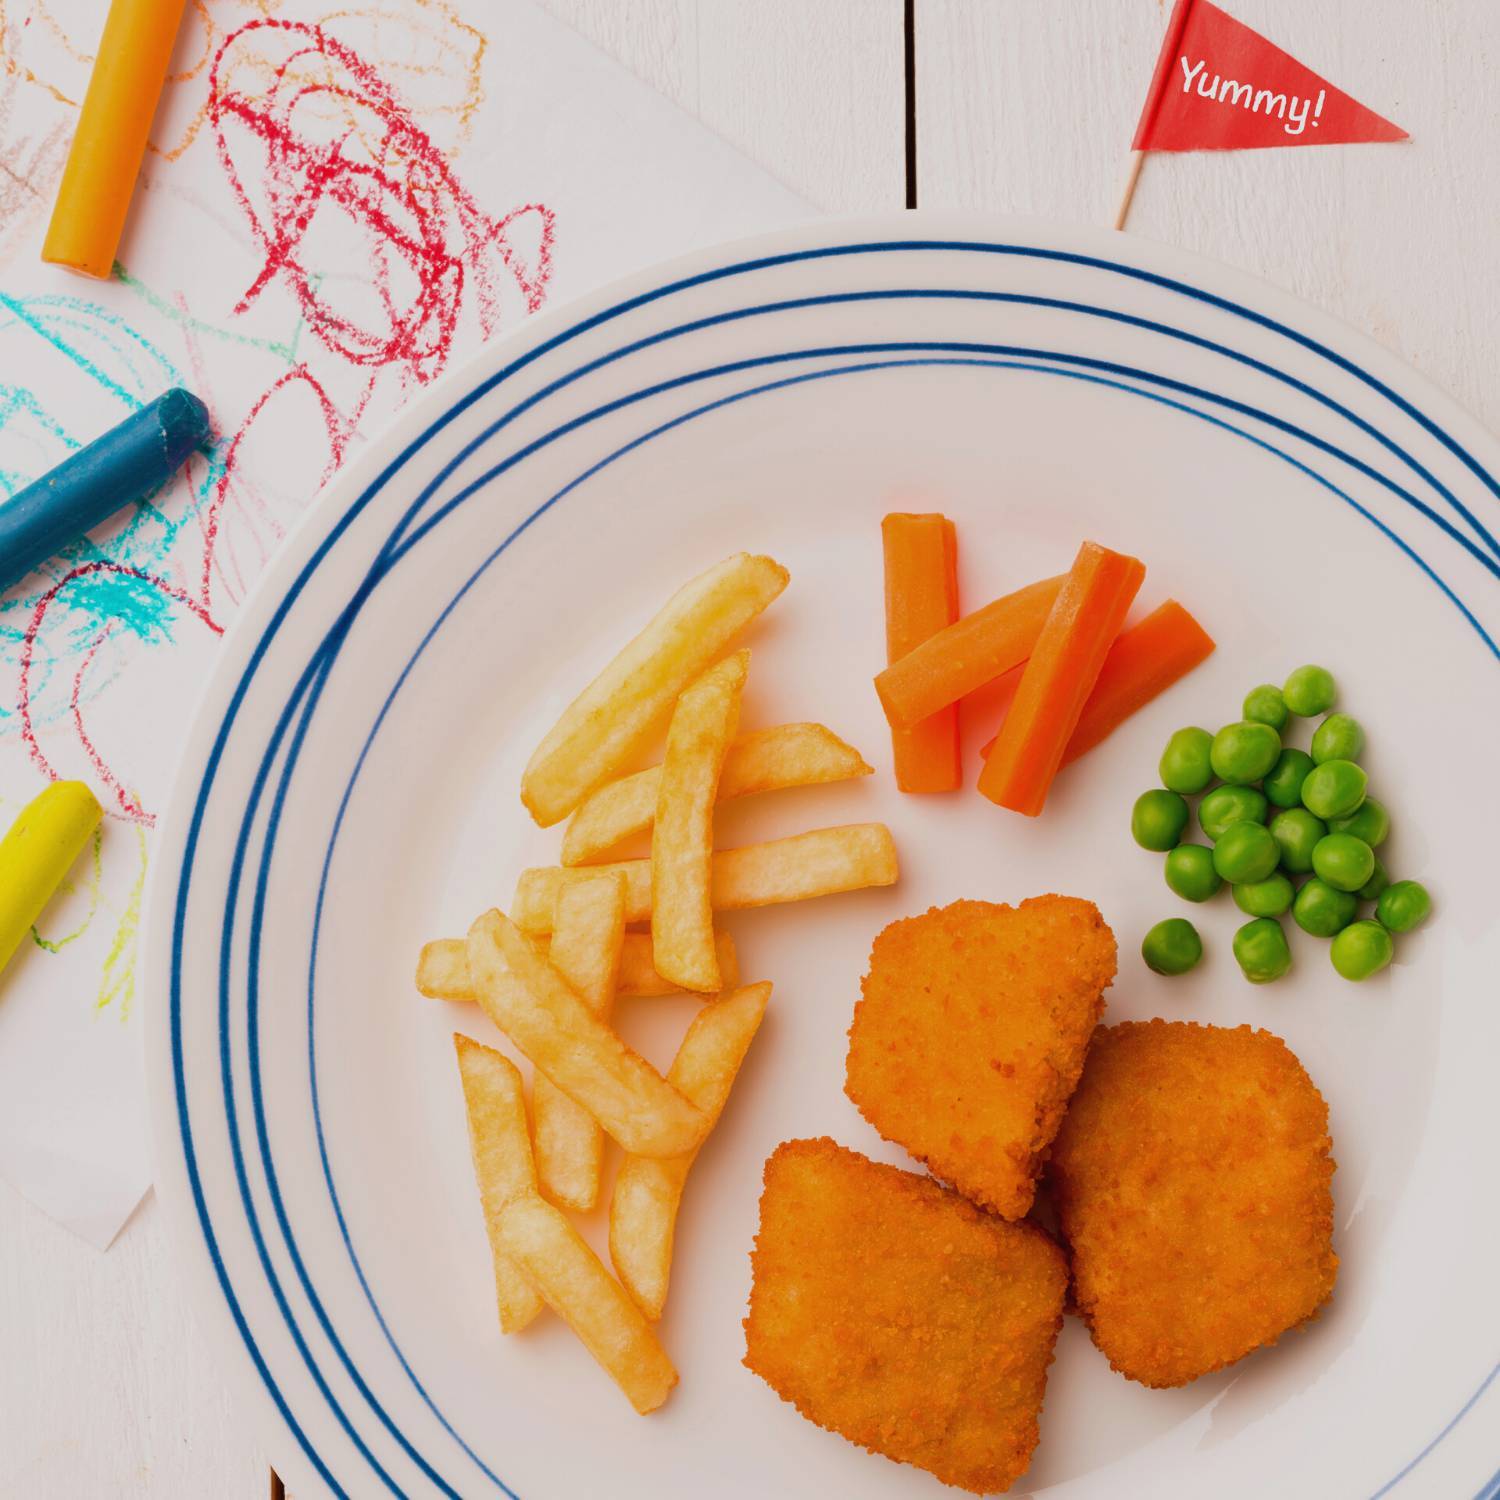 Image for Kid's Menu category